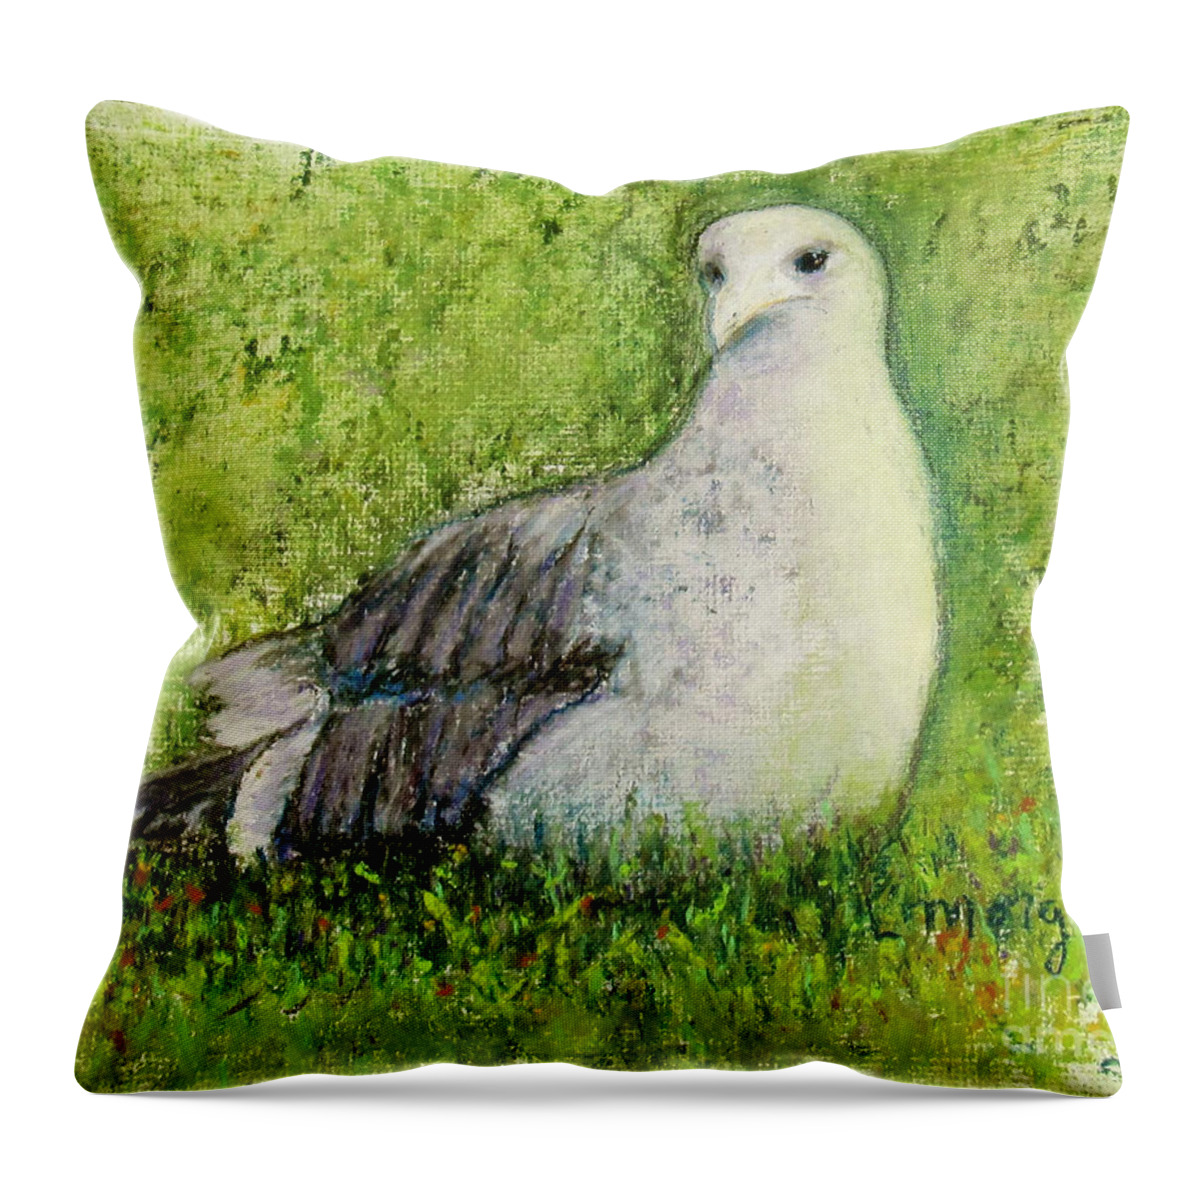 Bird Throw Pillow featuring the painting A Gull On The Grass by Laurie Morgan